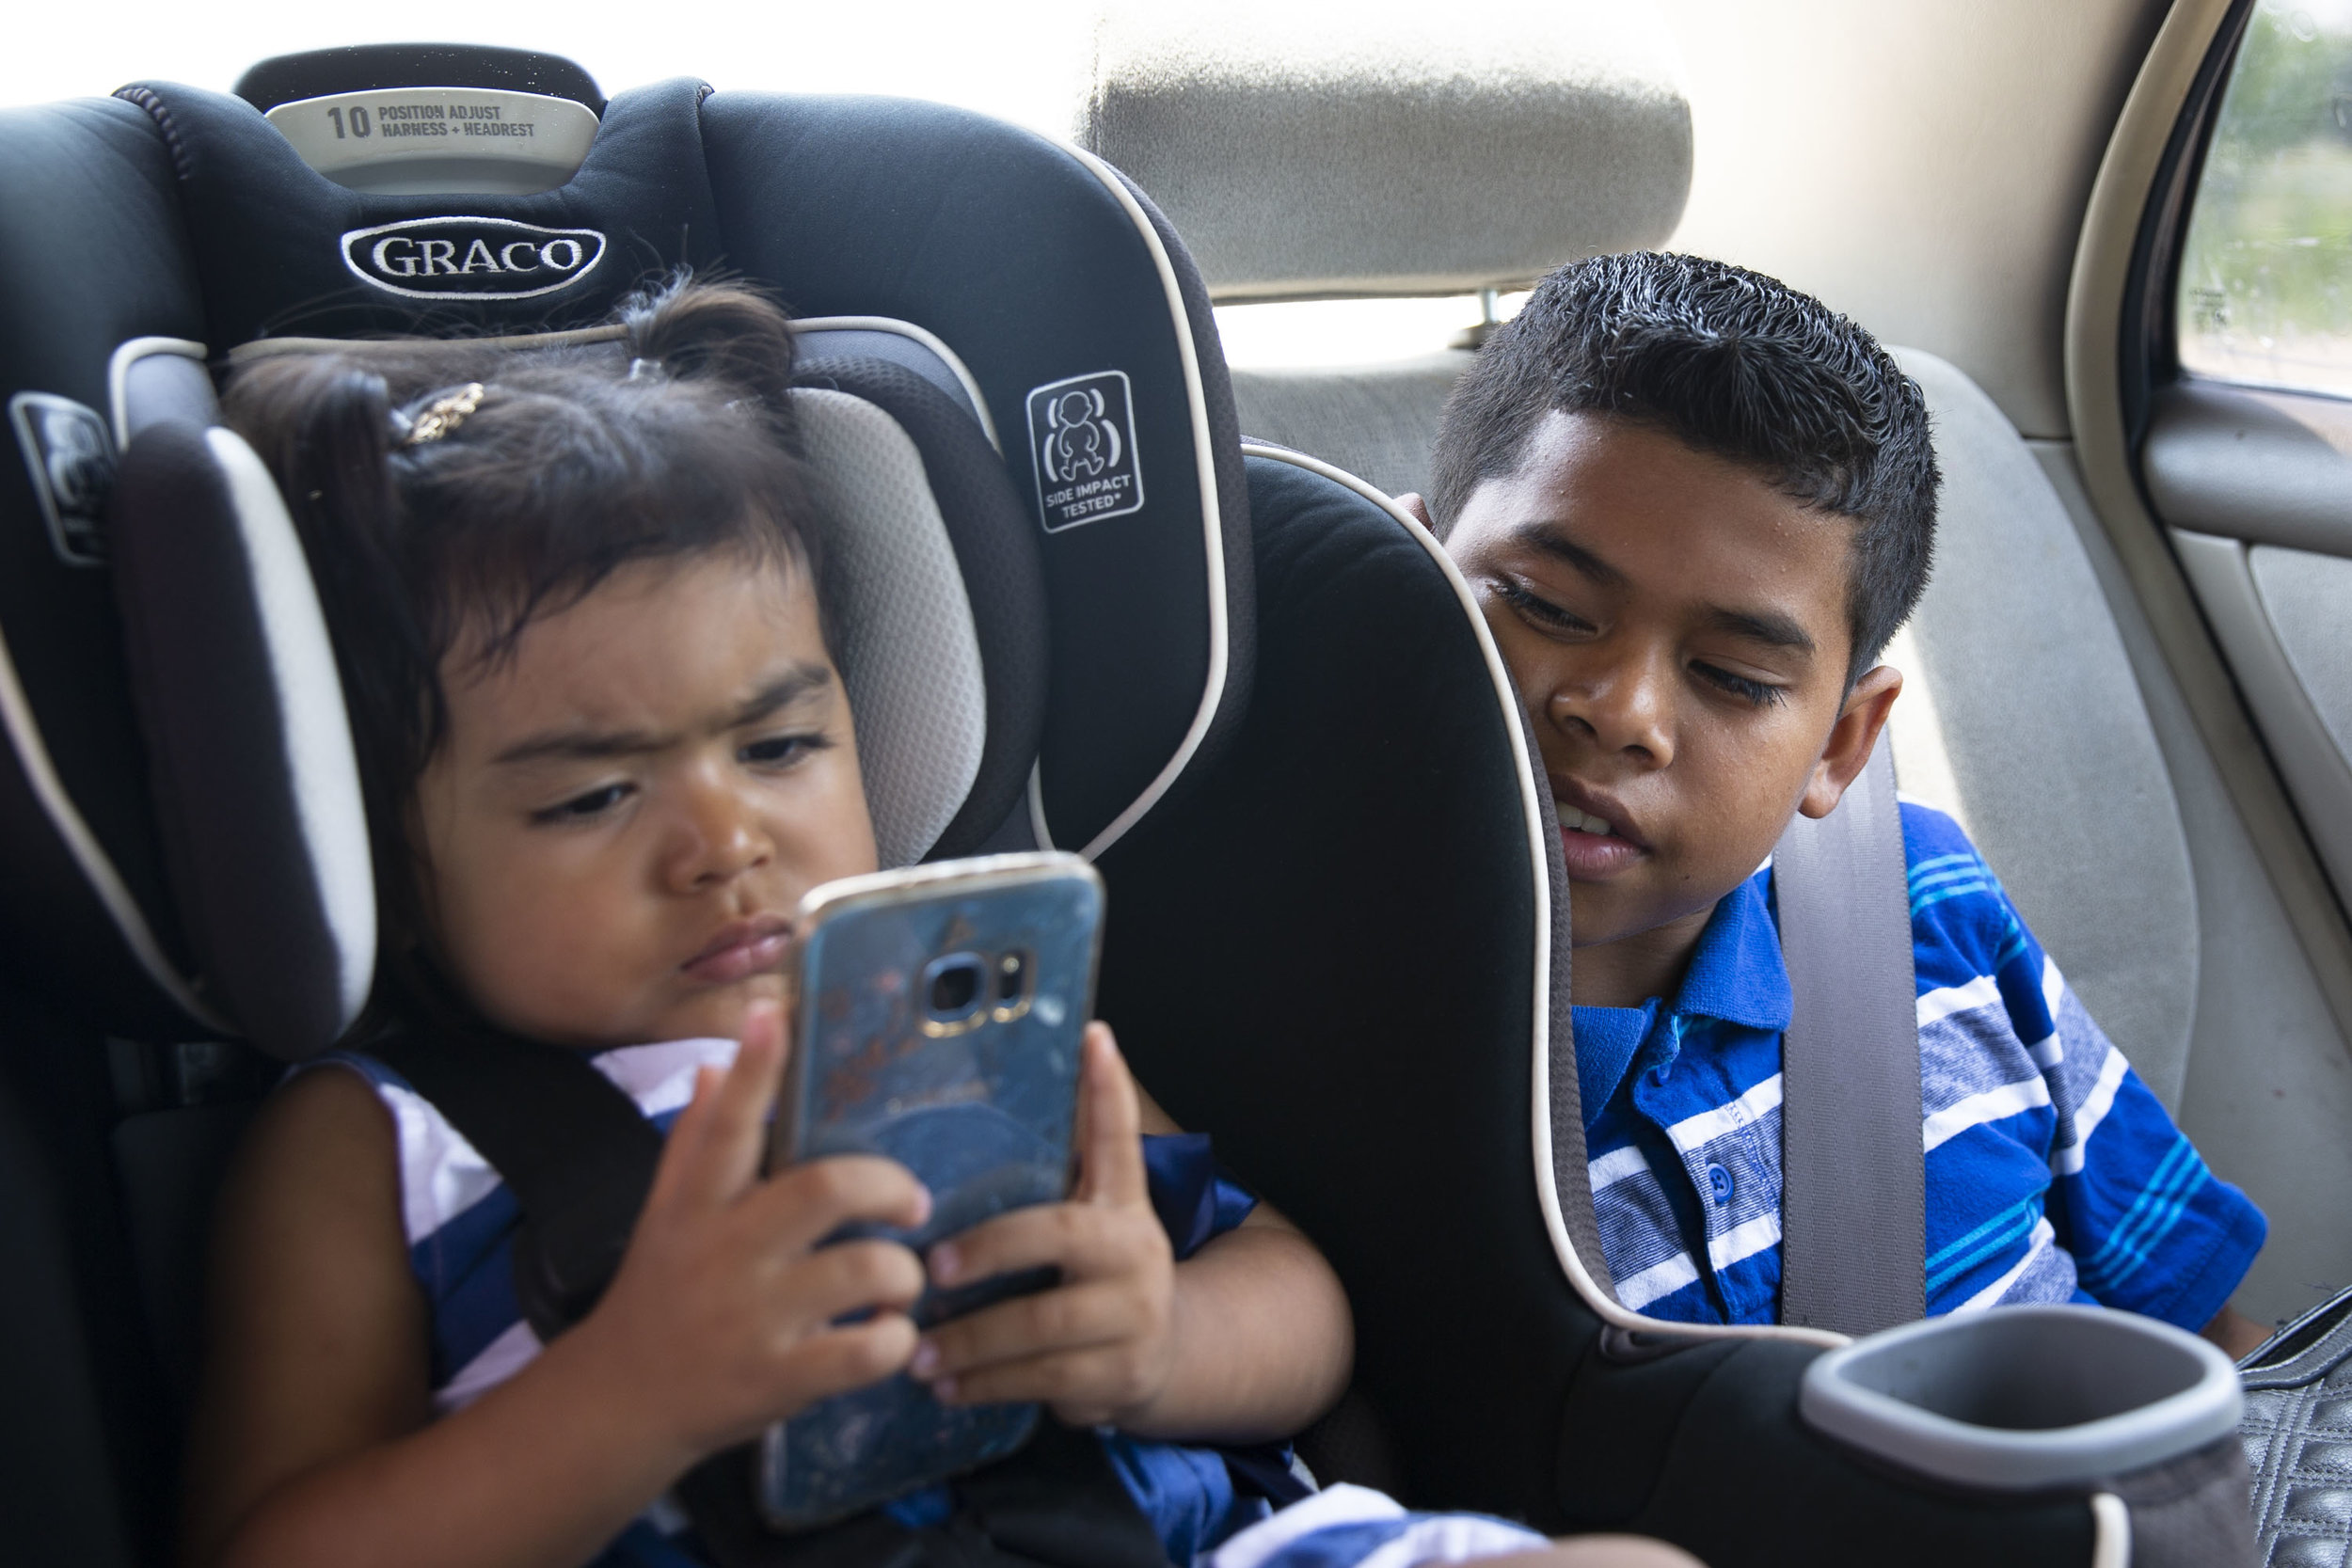  David Rosales, 11, watches his 2-year-old sister, Kelly, play with his mother's phone as they drive to a doctor's appointment on Friday, June 22, 2018. 